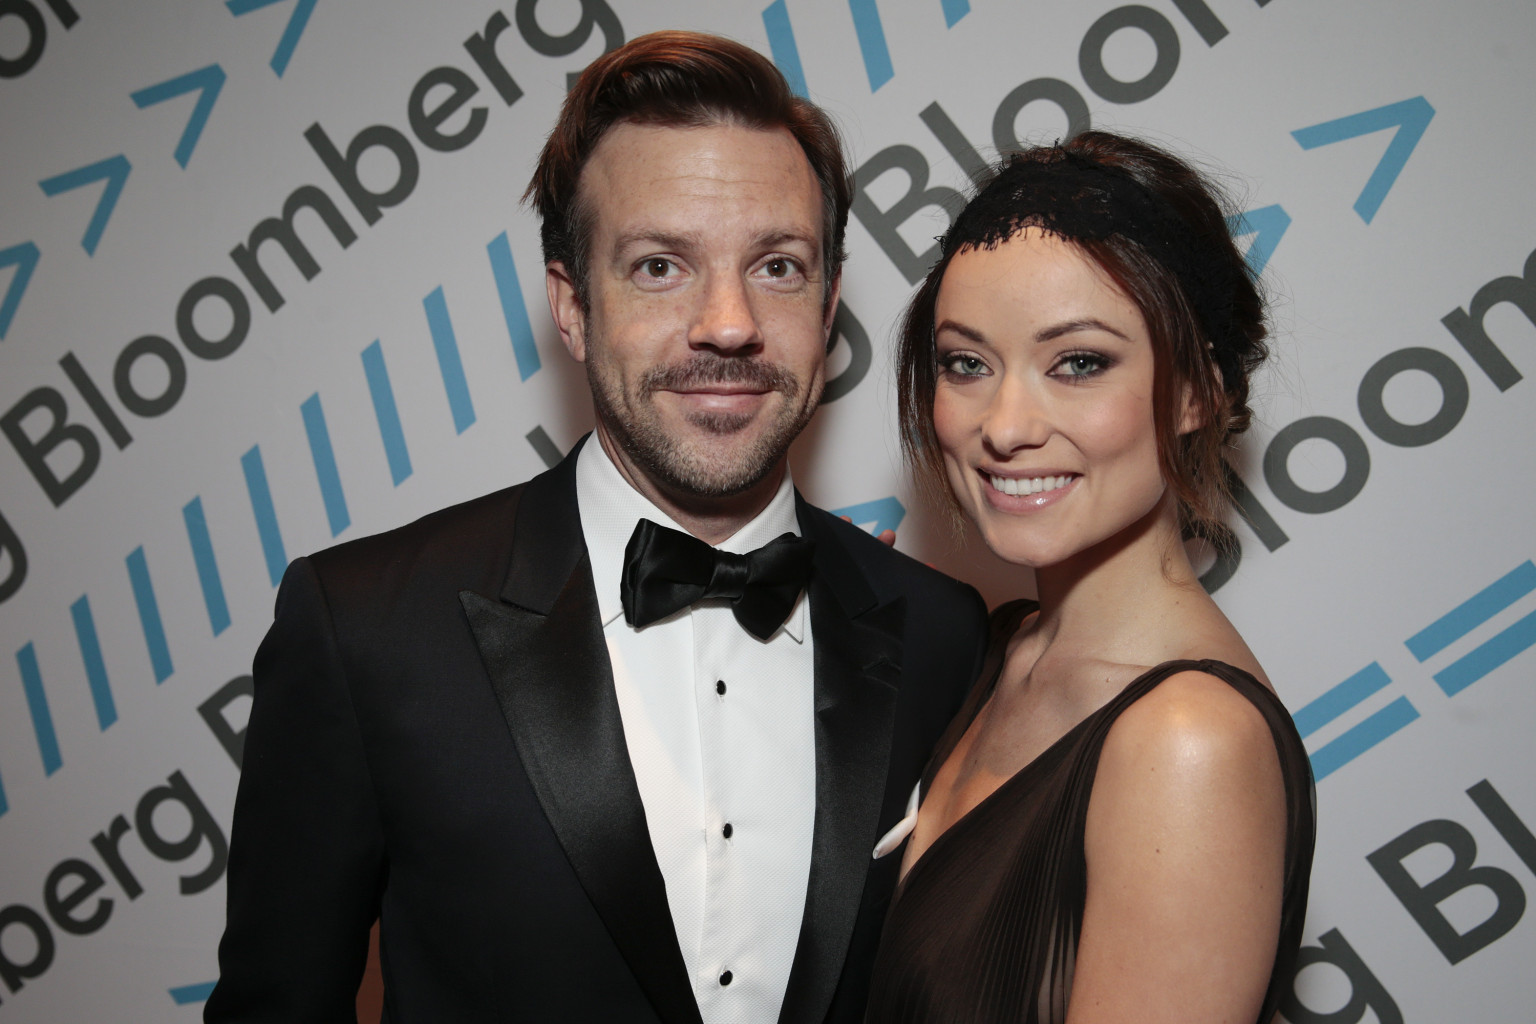 Image result for olivia wilde and jason sudeikis